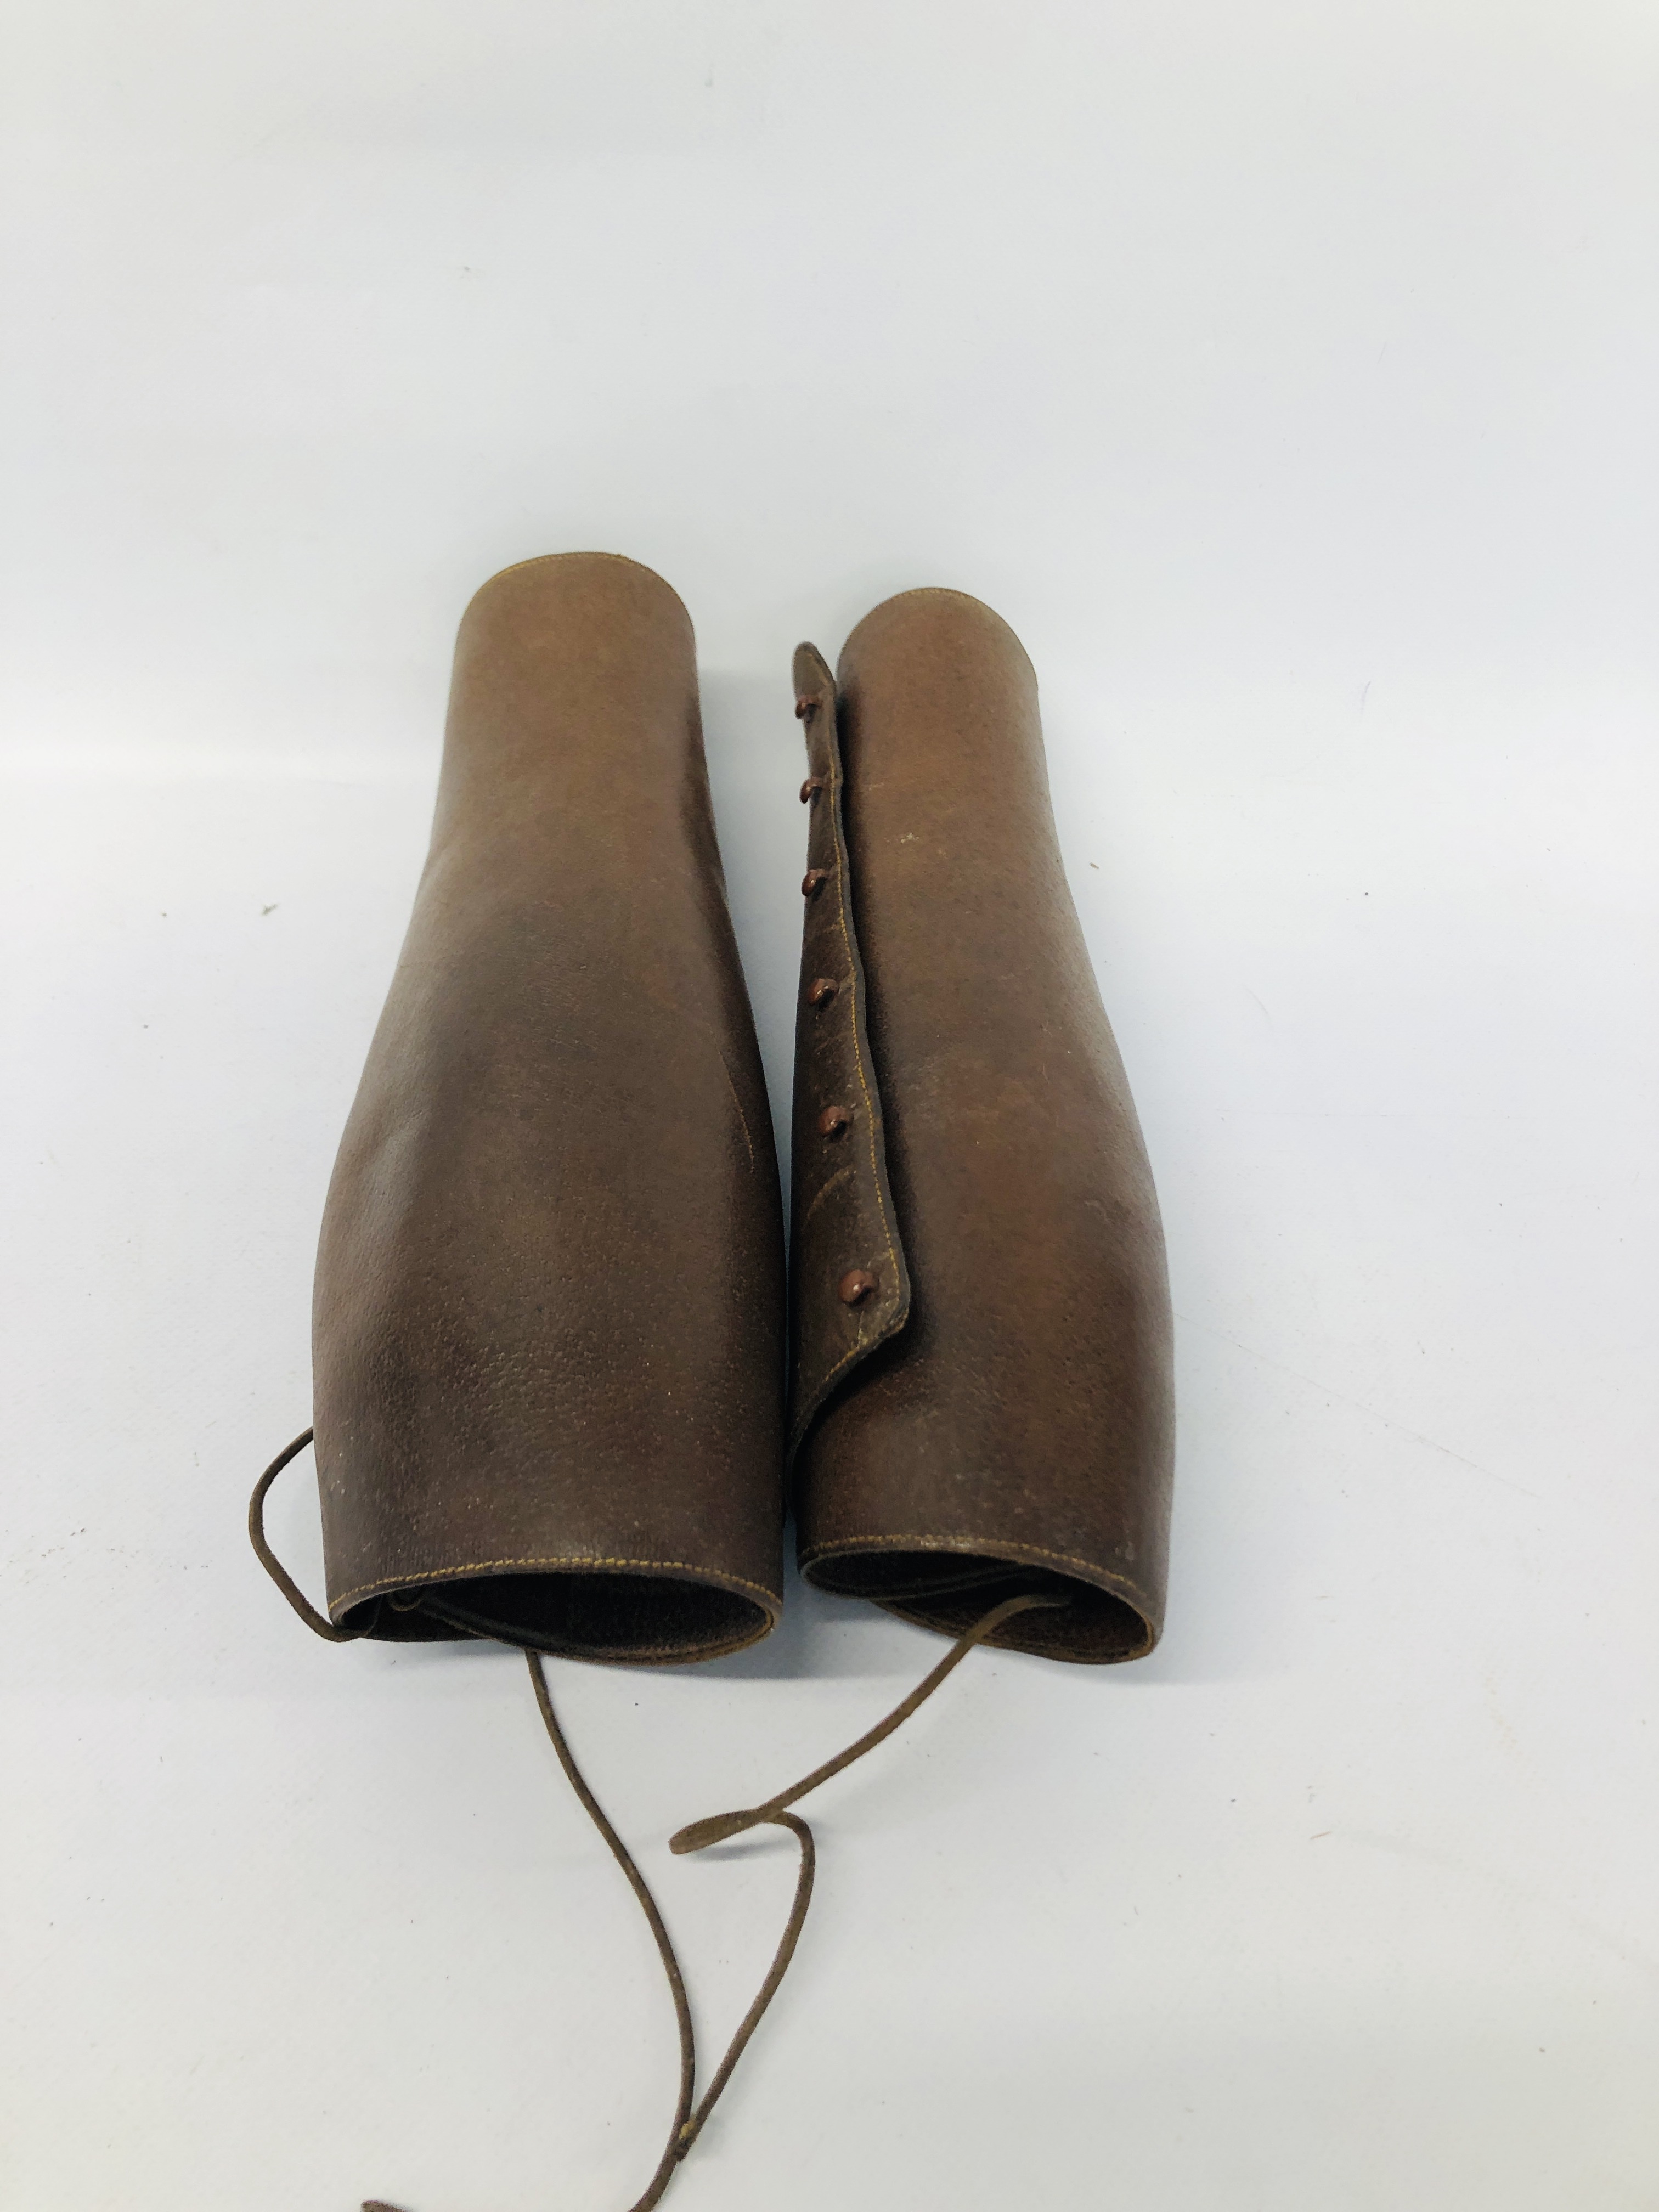 SIX PAIRS OF LEATHER BUSKINS - Image 7 of 8